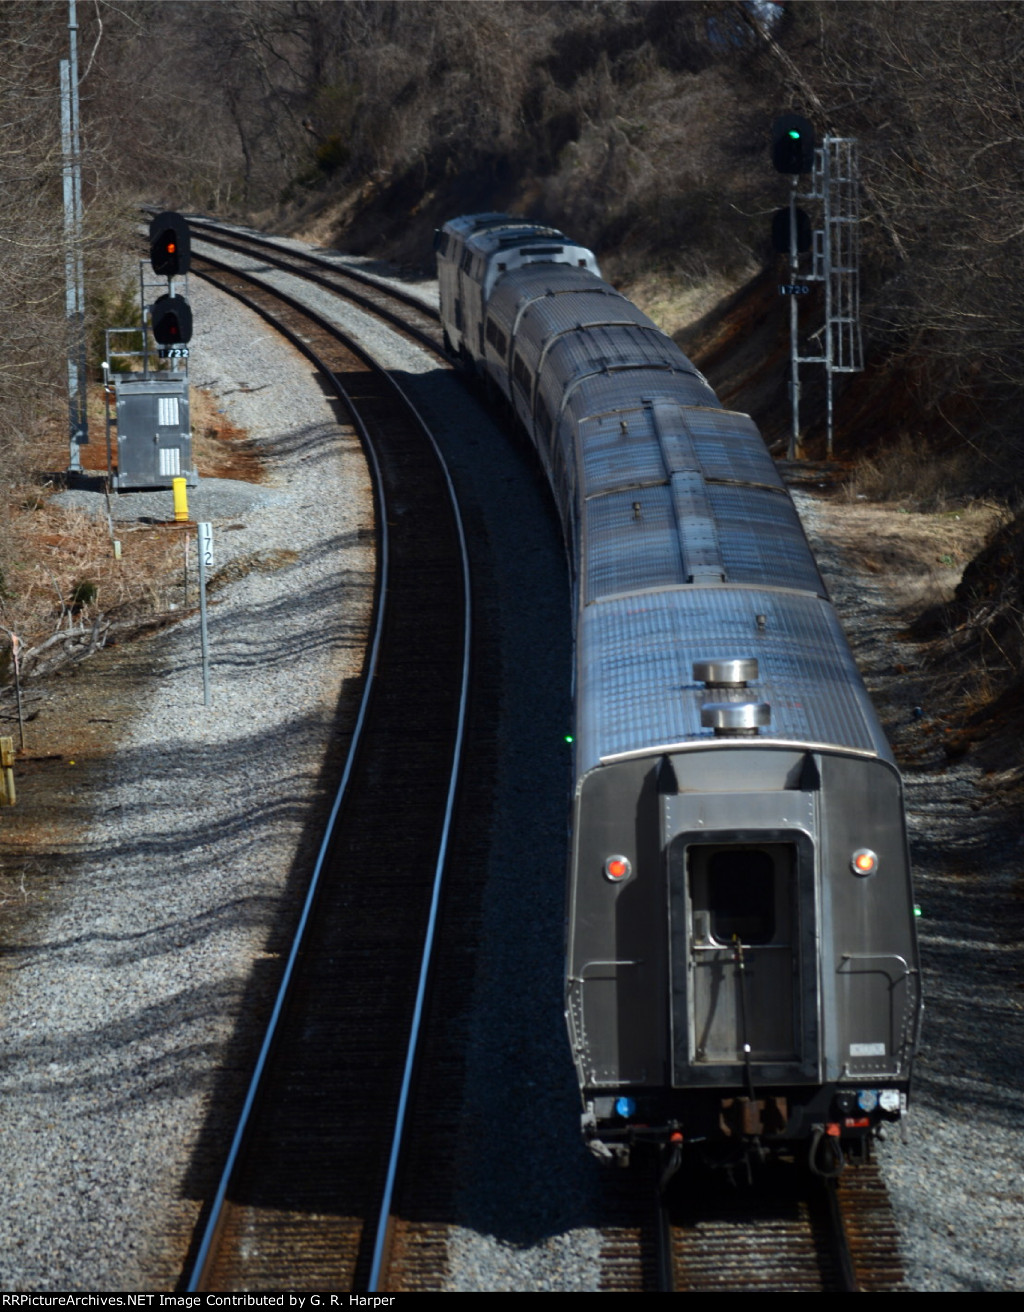 Amtrak #20 passes the Blackwater Creek signal soon after its departure from Lynchburg.